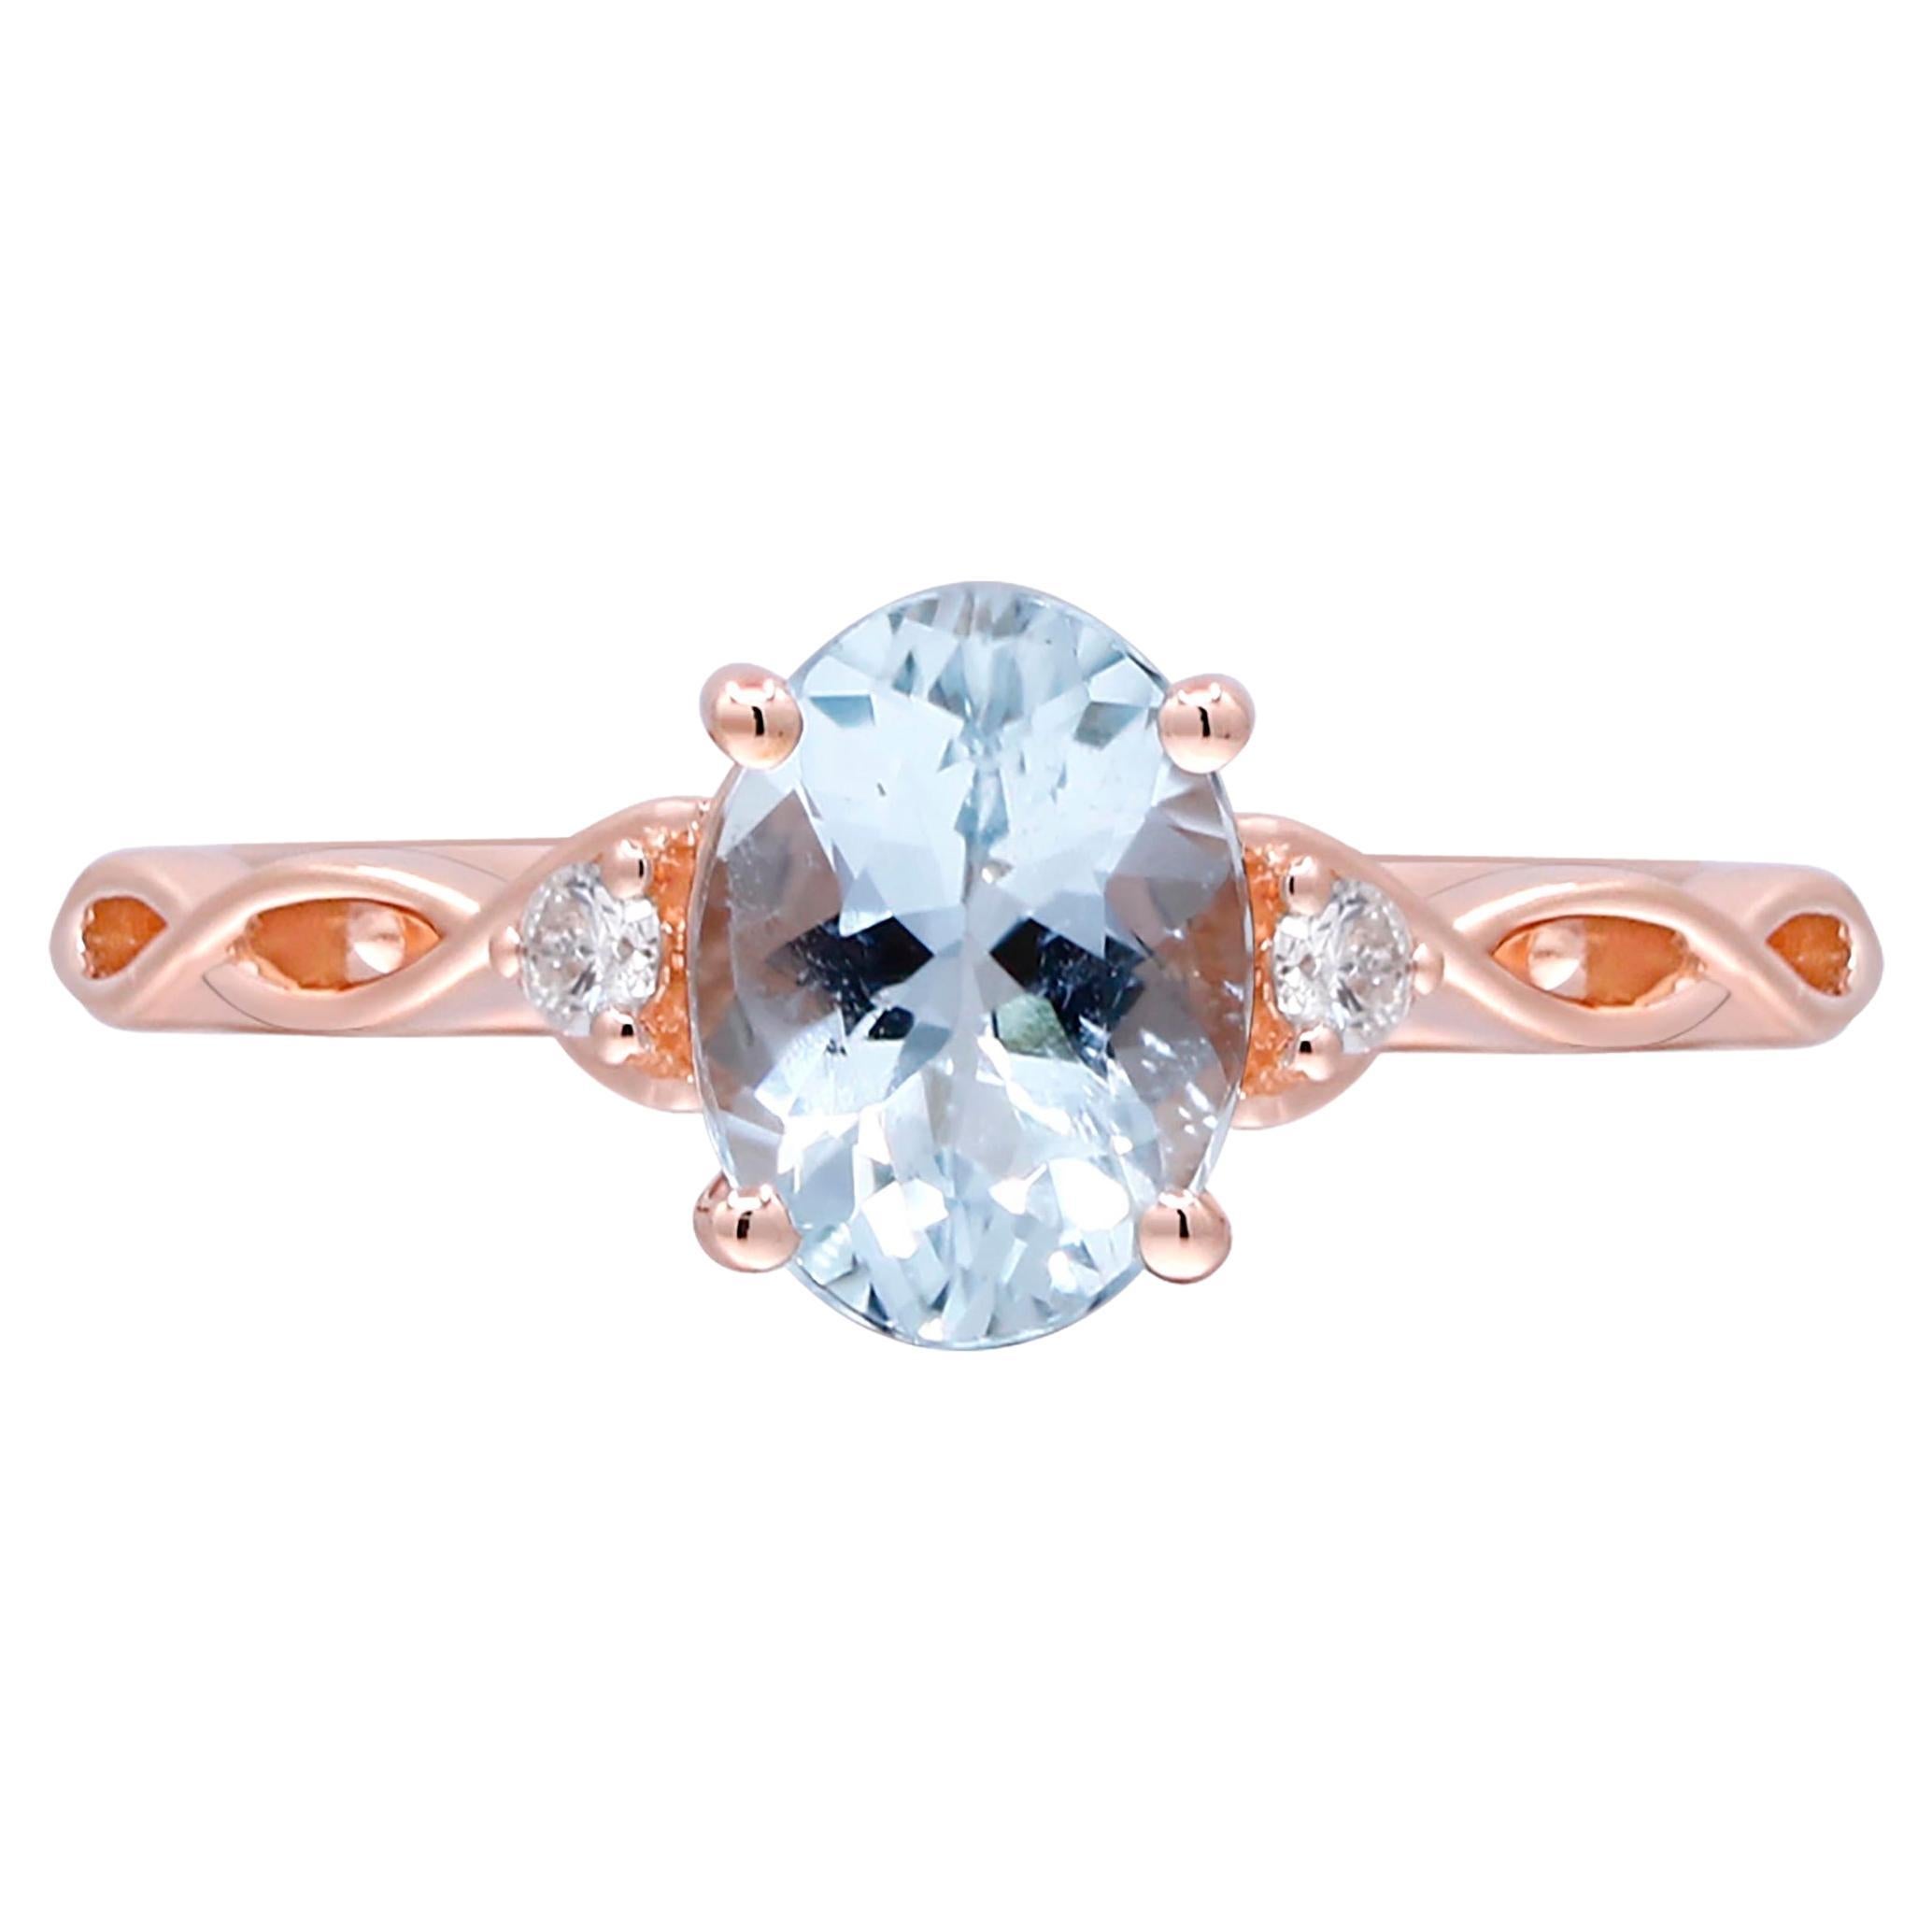 1.09 Carat Oval-Cut Aquamarine with Diamond Accents 14K Rose Gold Ring For Sale